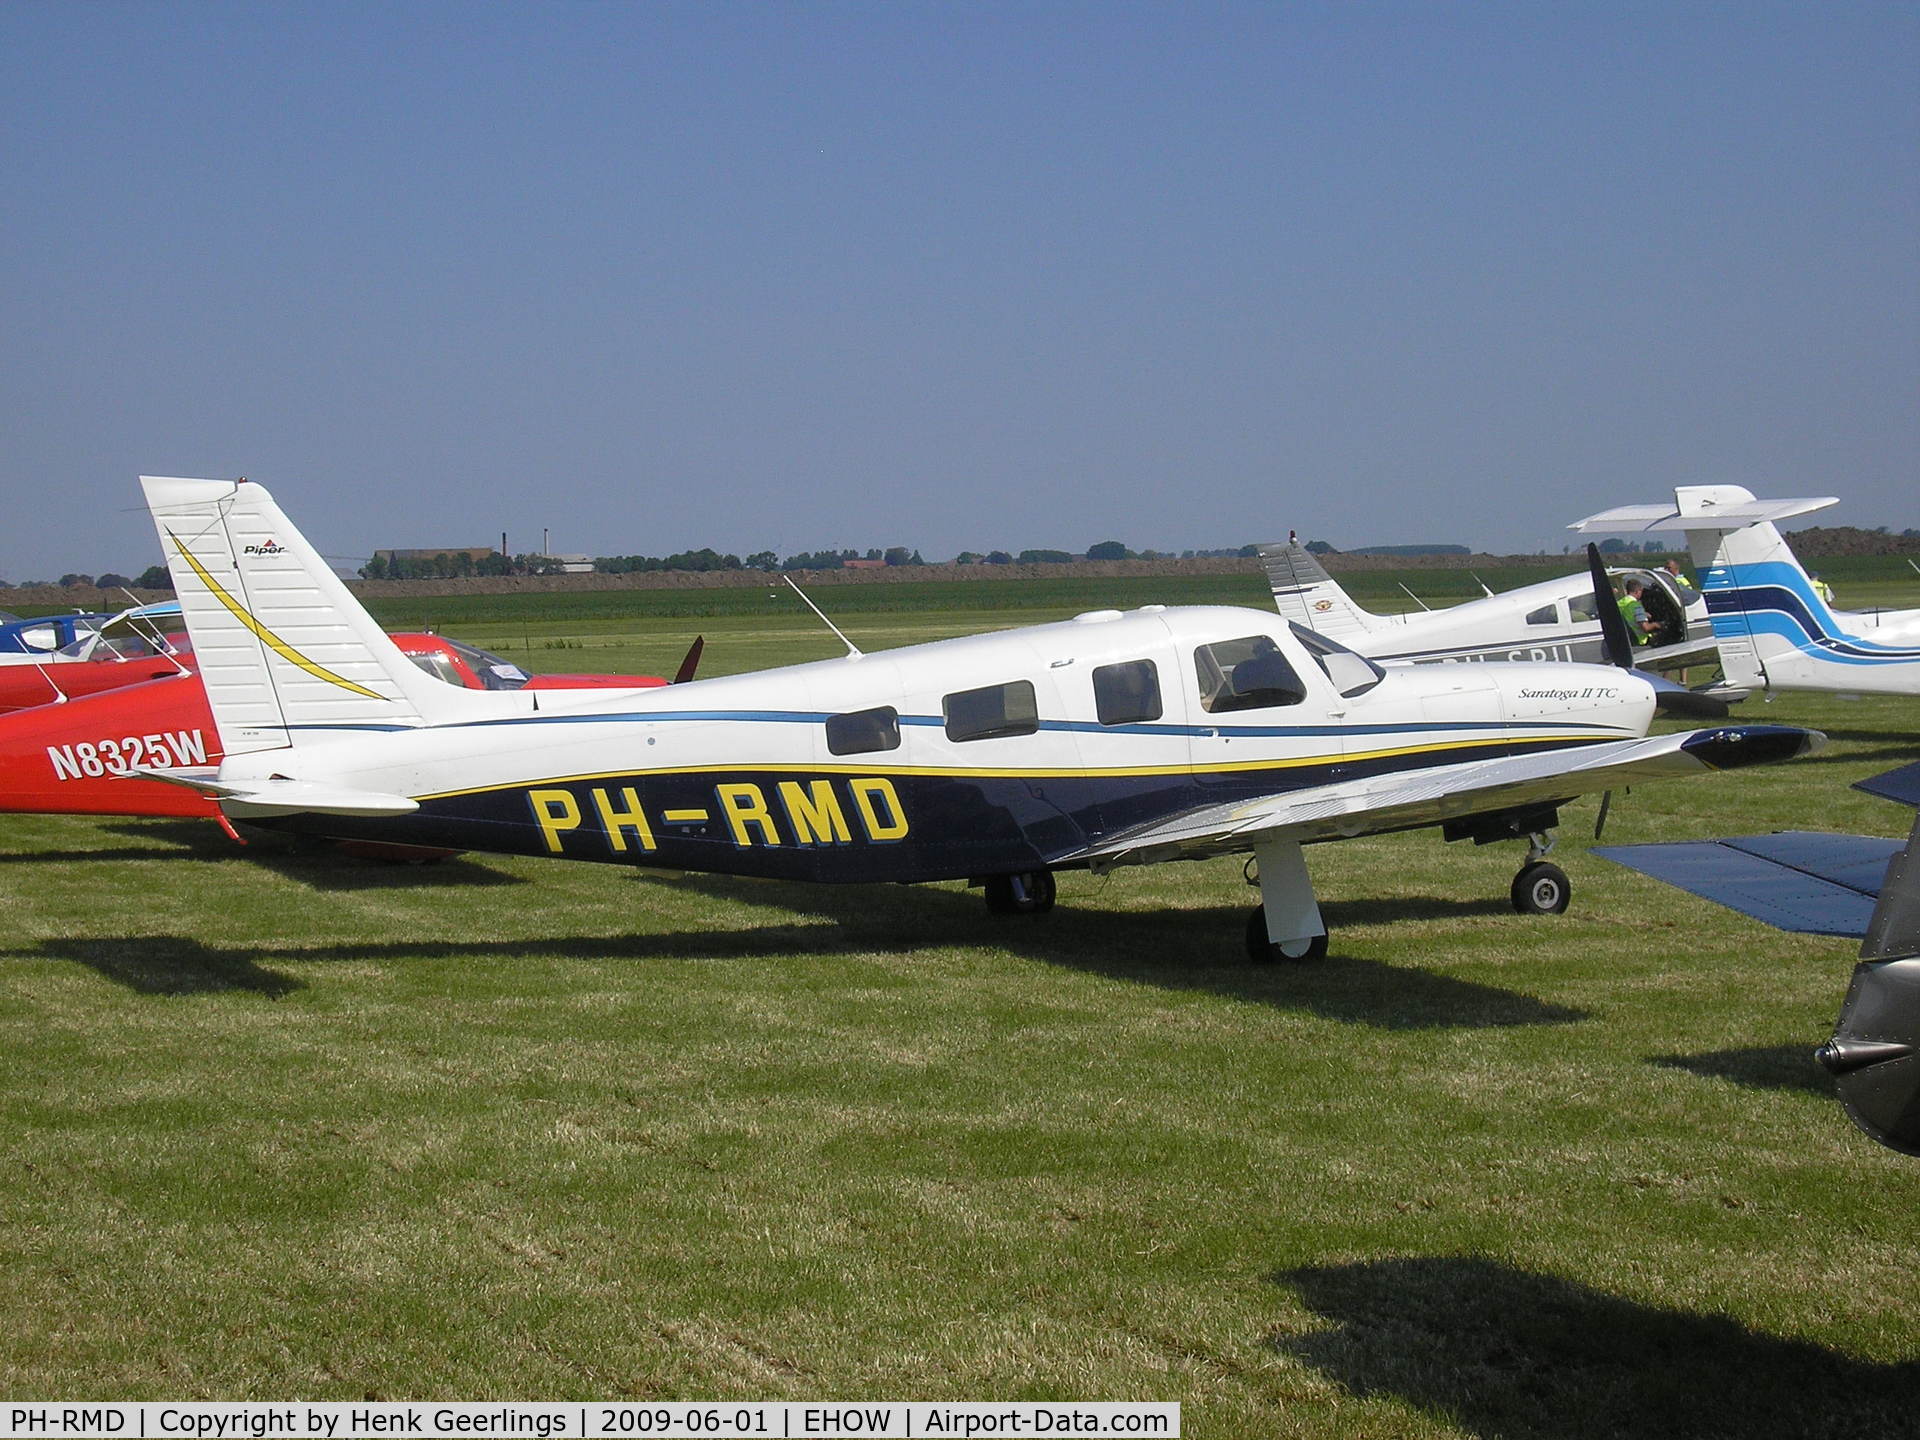 PH-RMD, 2002 Piper PA-32R-301T Turbo Saratoga C/N 32-57281, Oostwold  Airport  Airshow june 2009